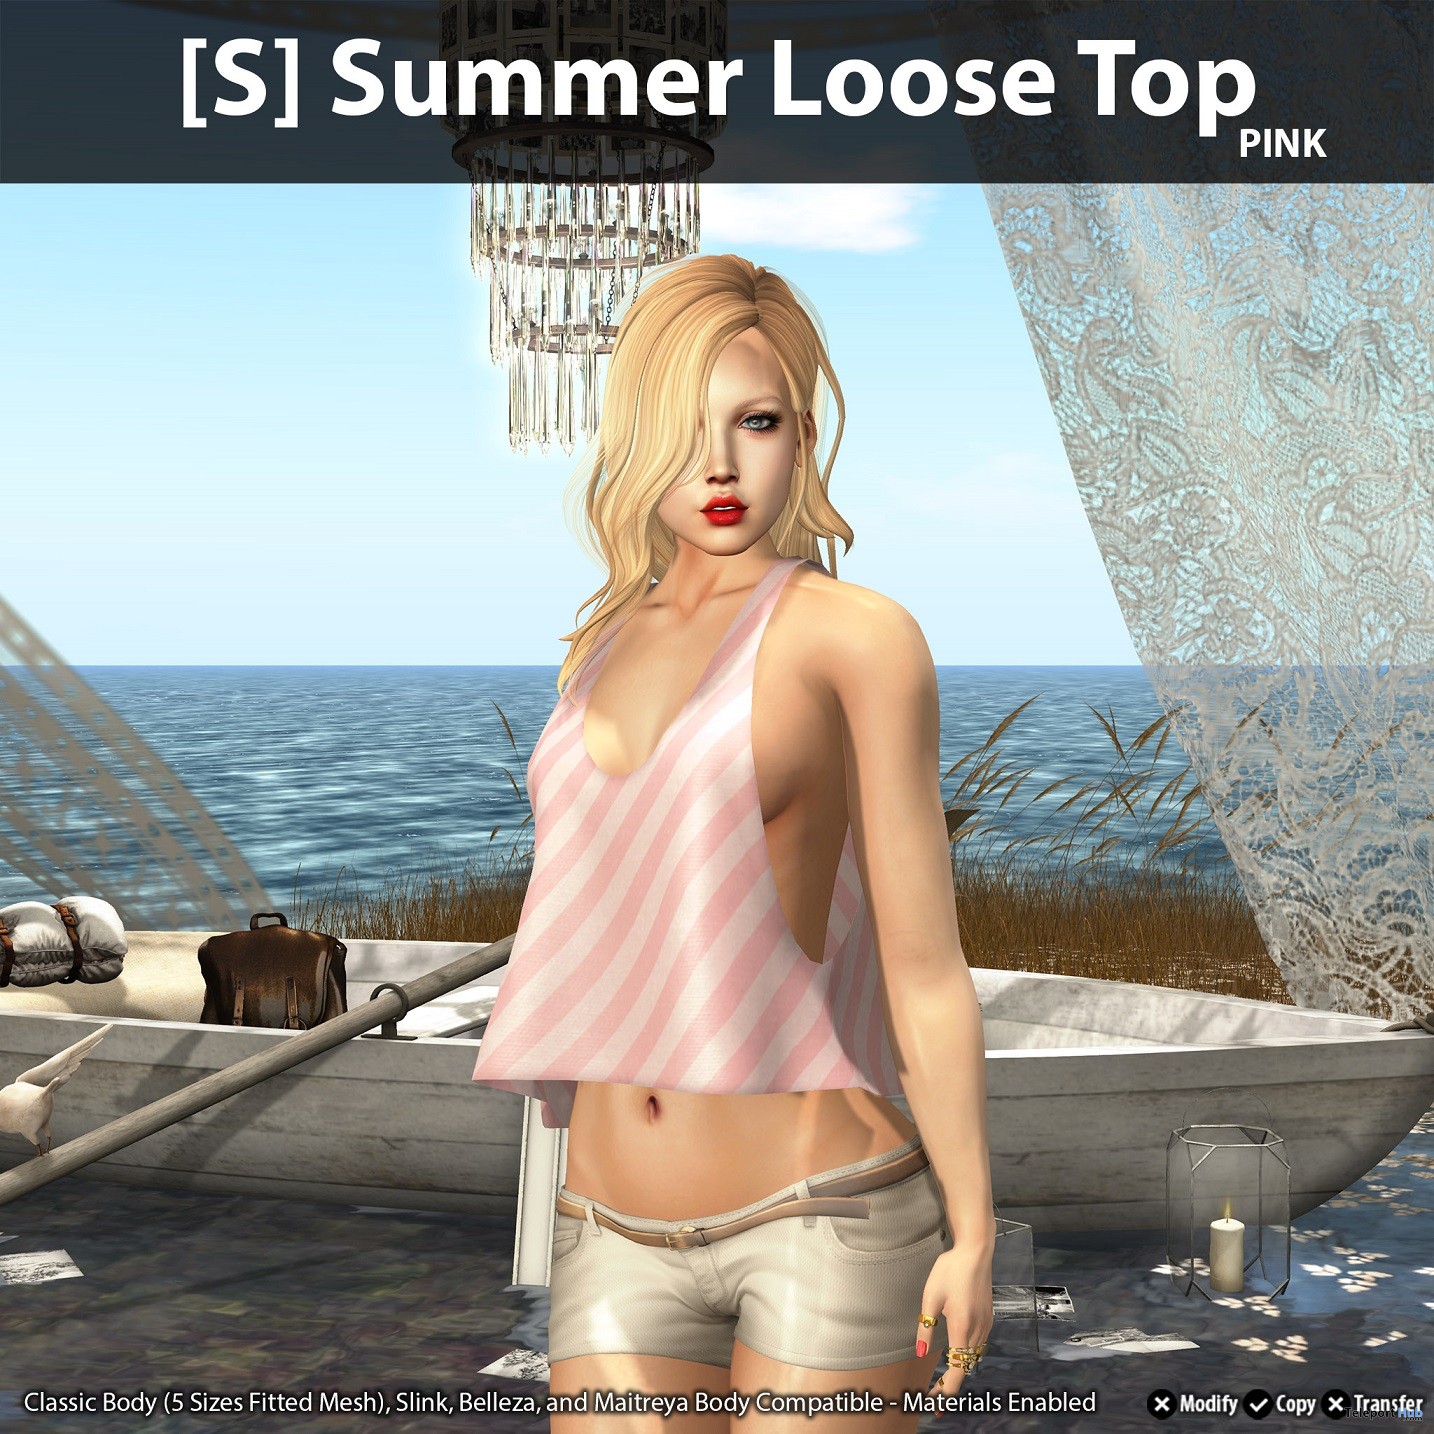 New Release: [S] Summer Loose Top by [satus Inc] - Teleport Hub - teleporthub.com